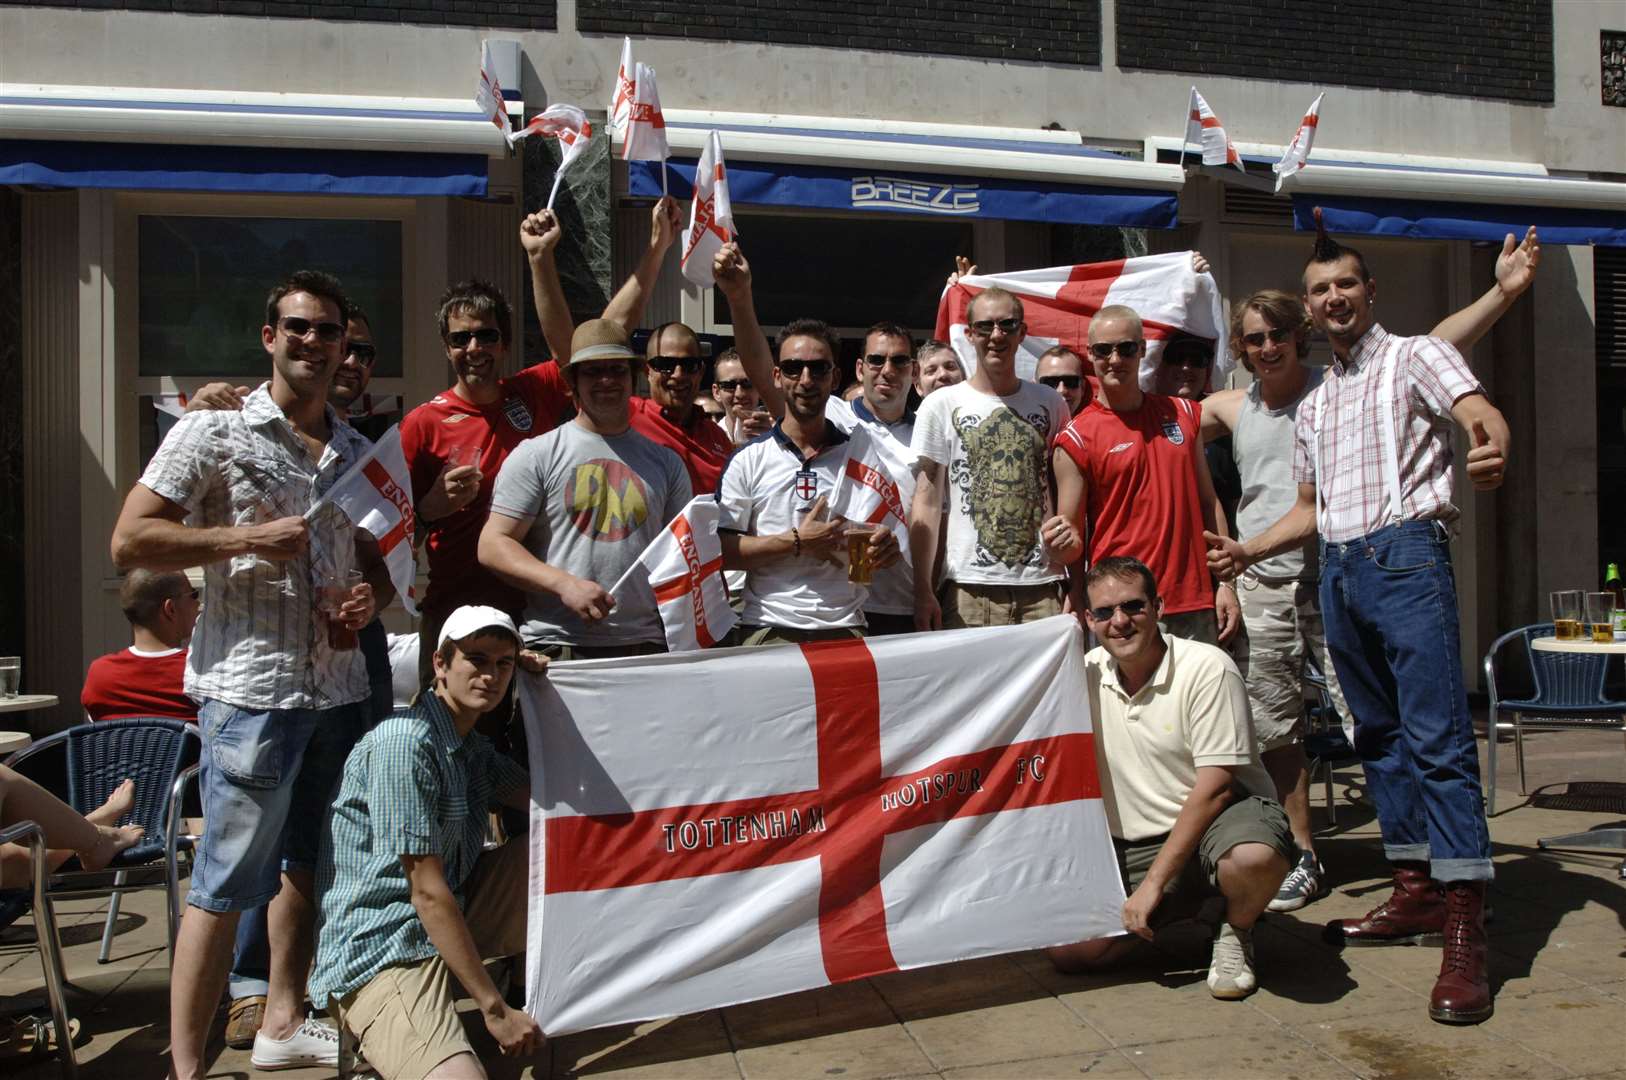 Optimism at Breeze Bar in Maidstone before England play Germany